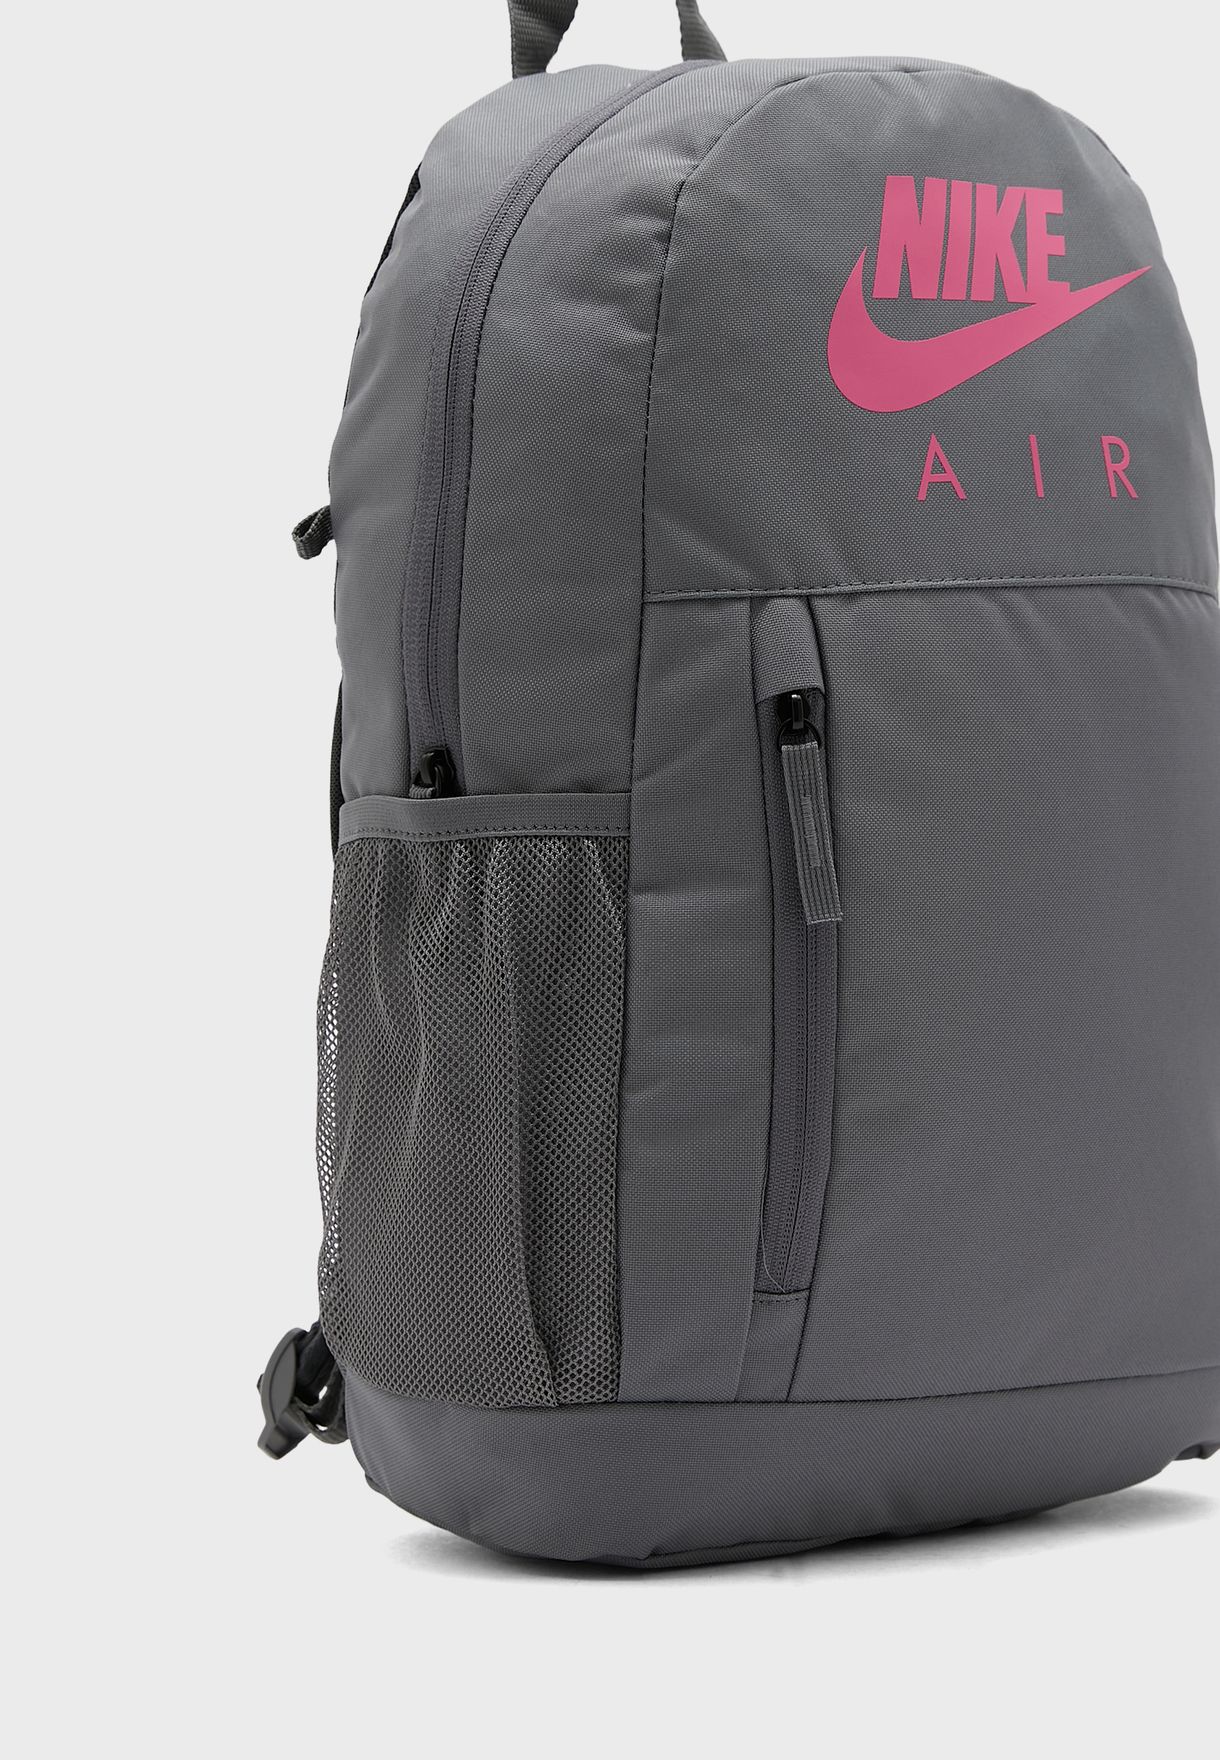 Elemental Graphic Backpack